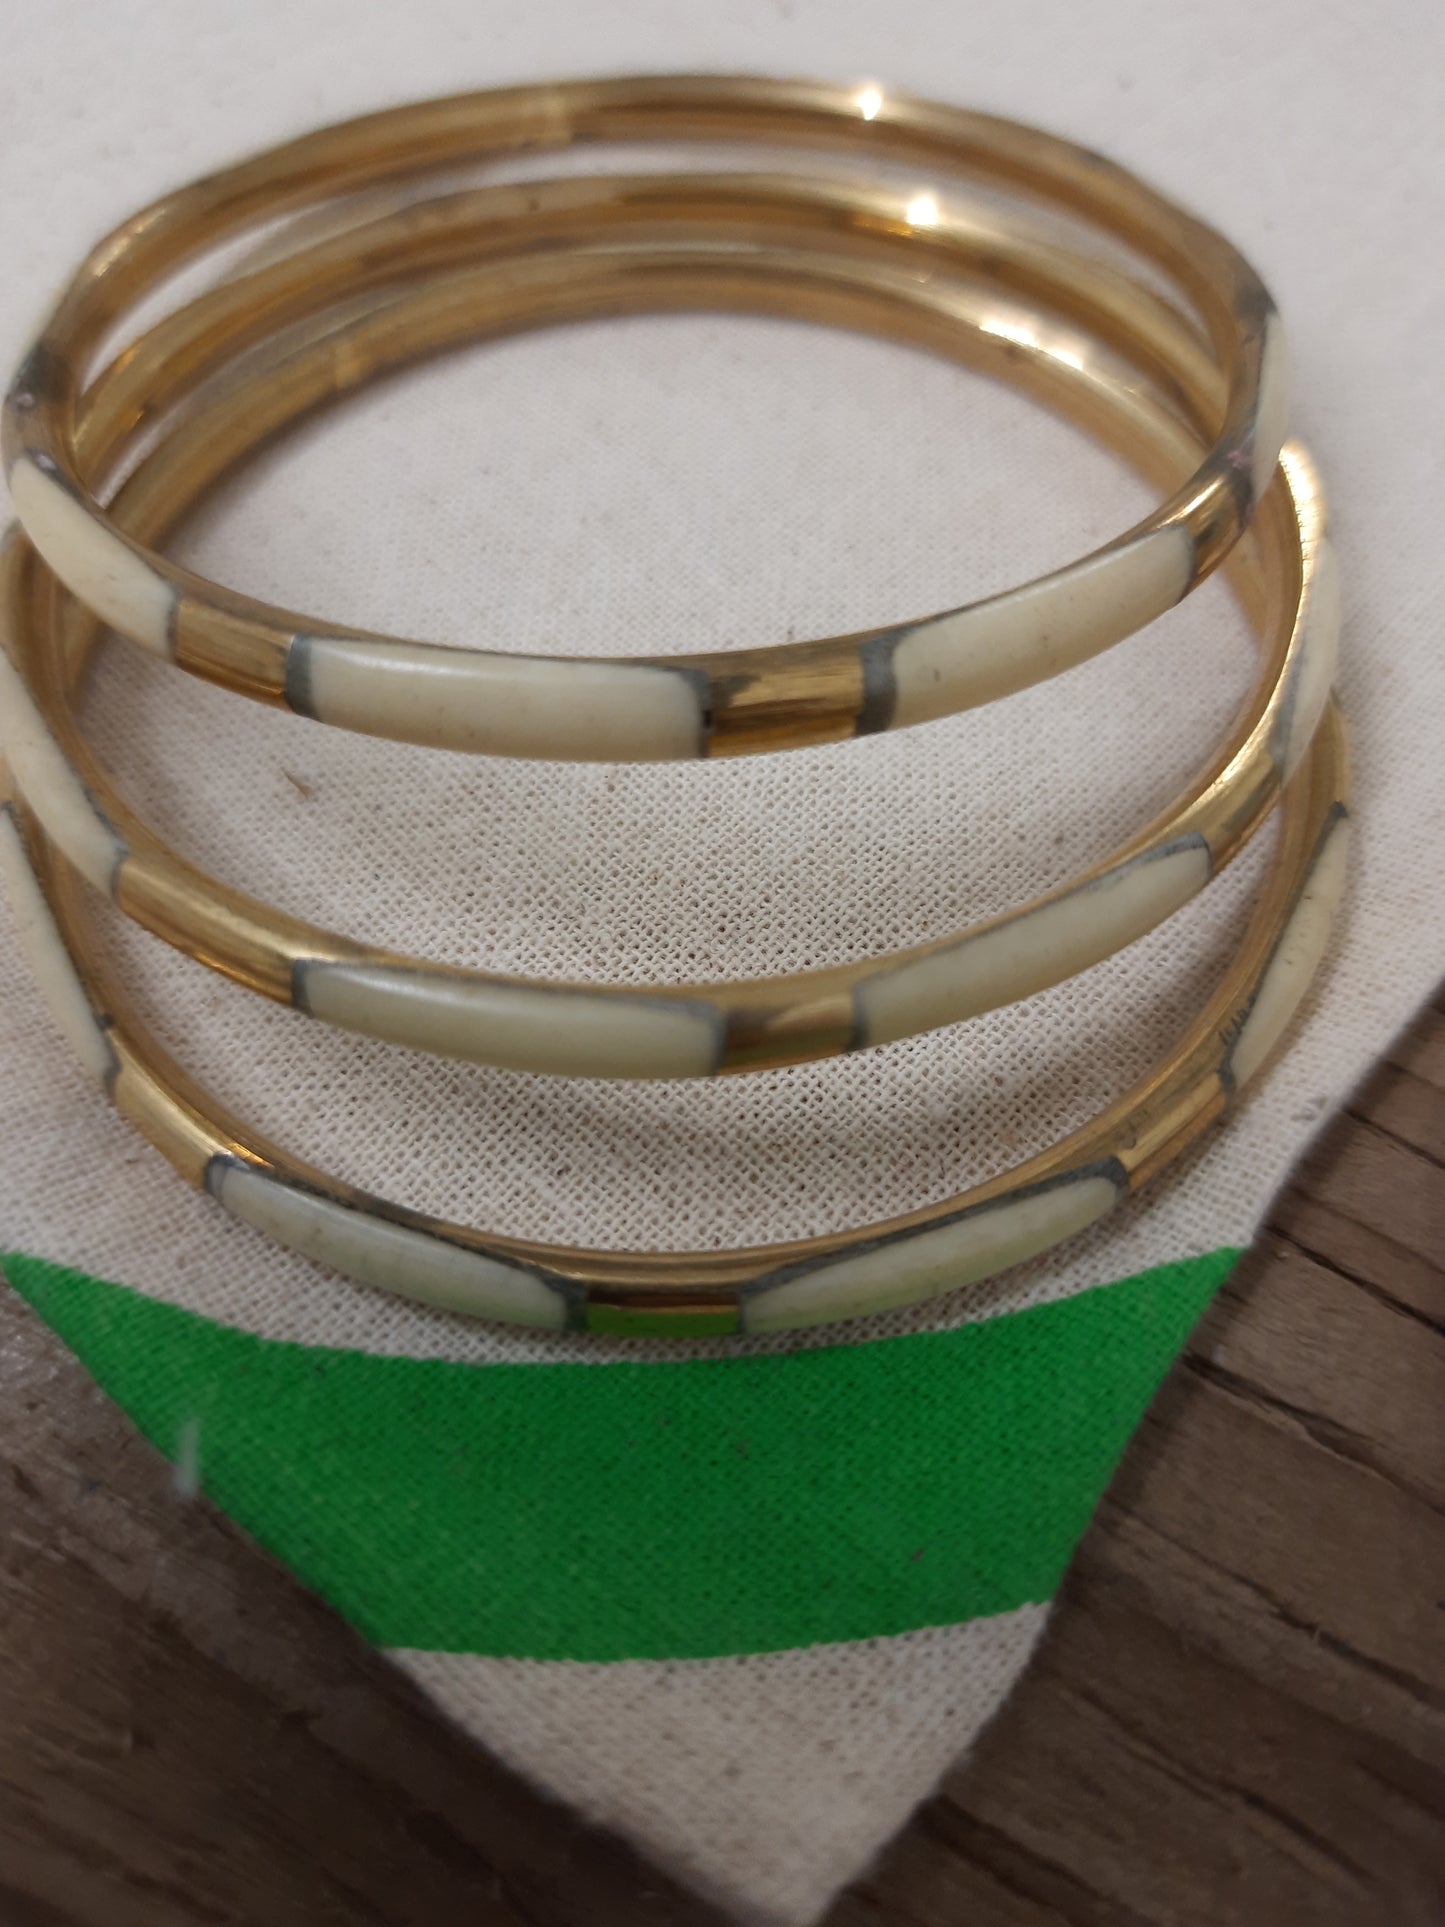 Bangles | UK Ethical Jewellery | Colourful | Jewelry Fair Trade | Eco Friendly Shop | 3 Set